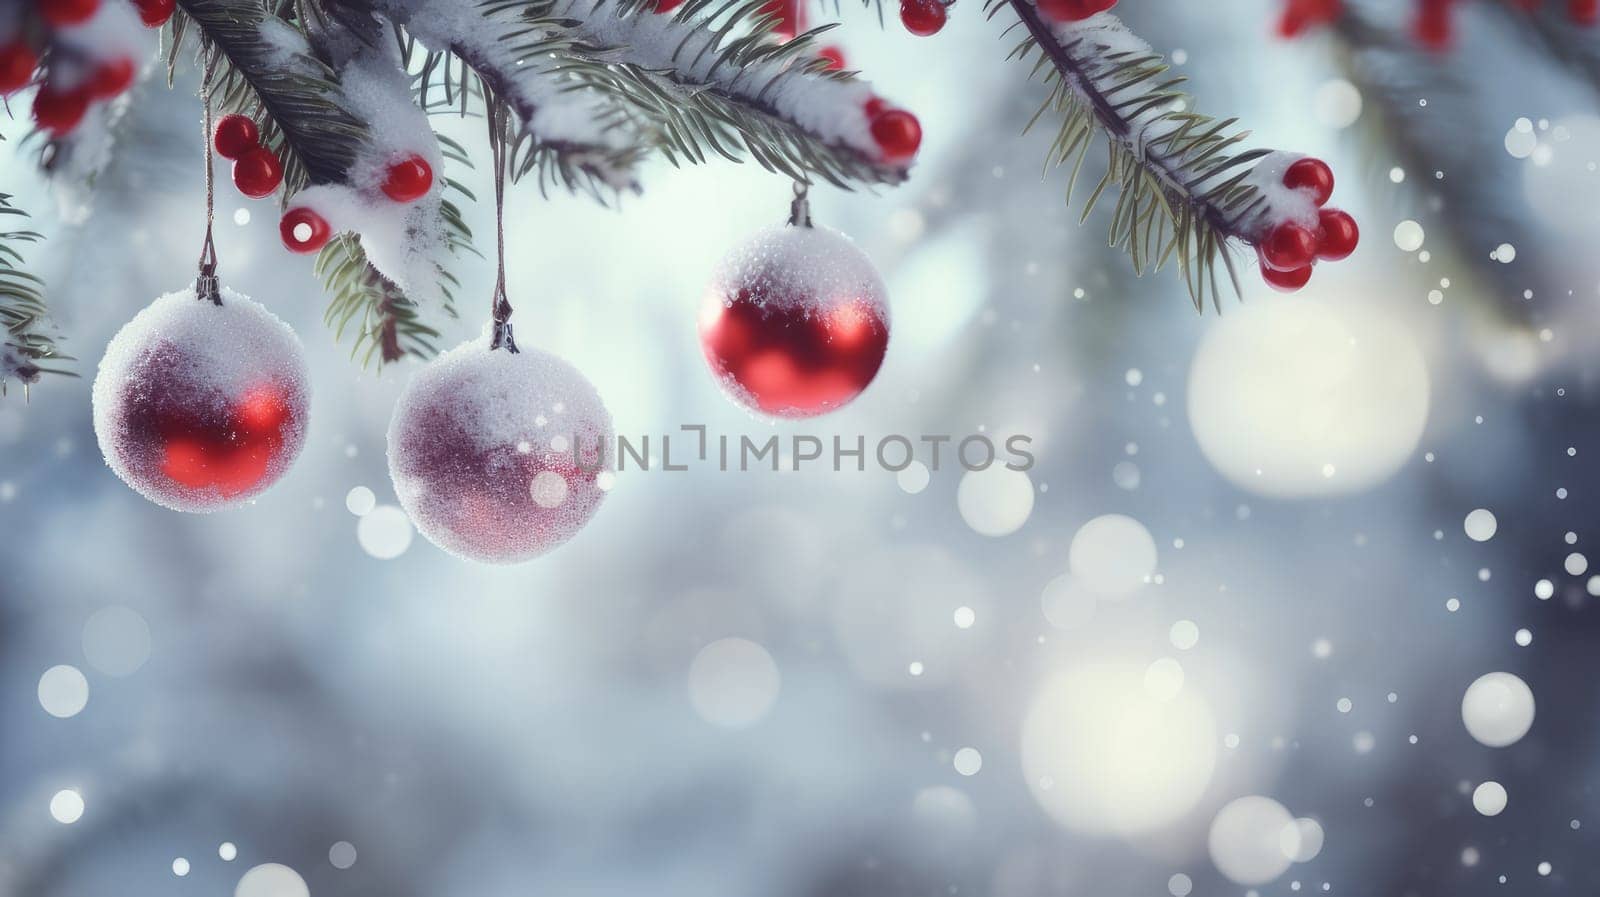 Red balls on fir branches, winter snowy background. festive winter season background, copy space.